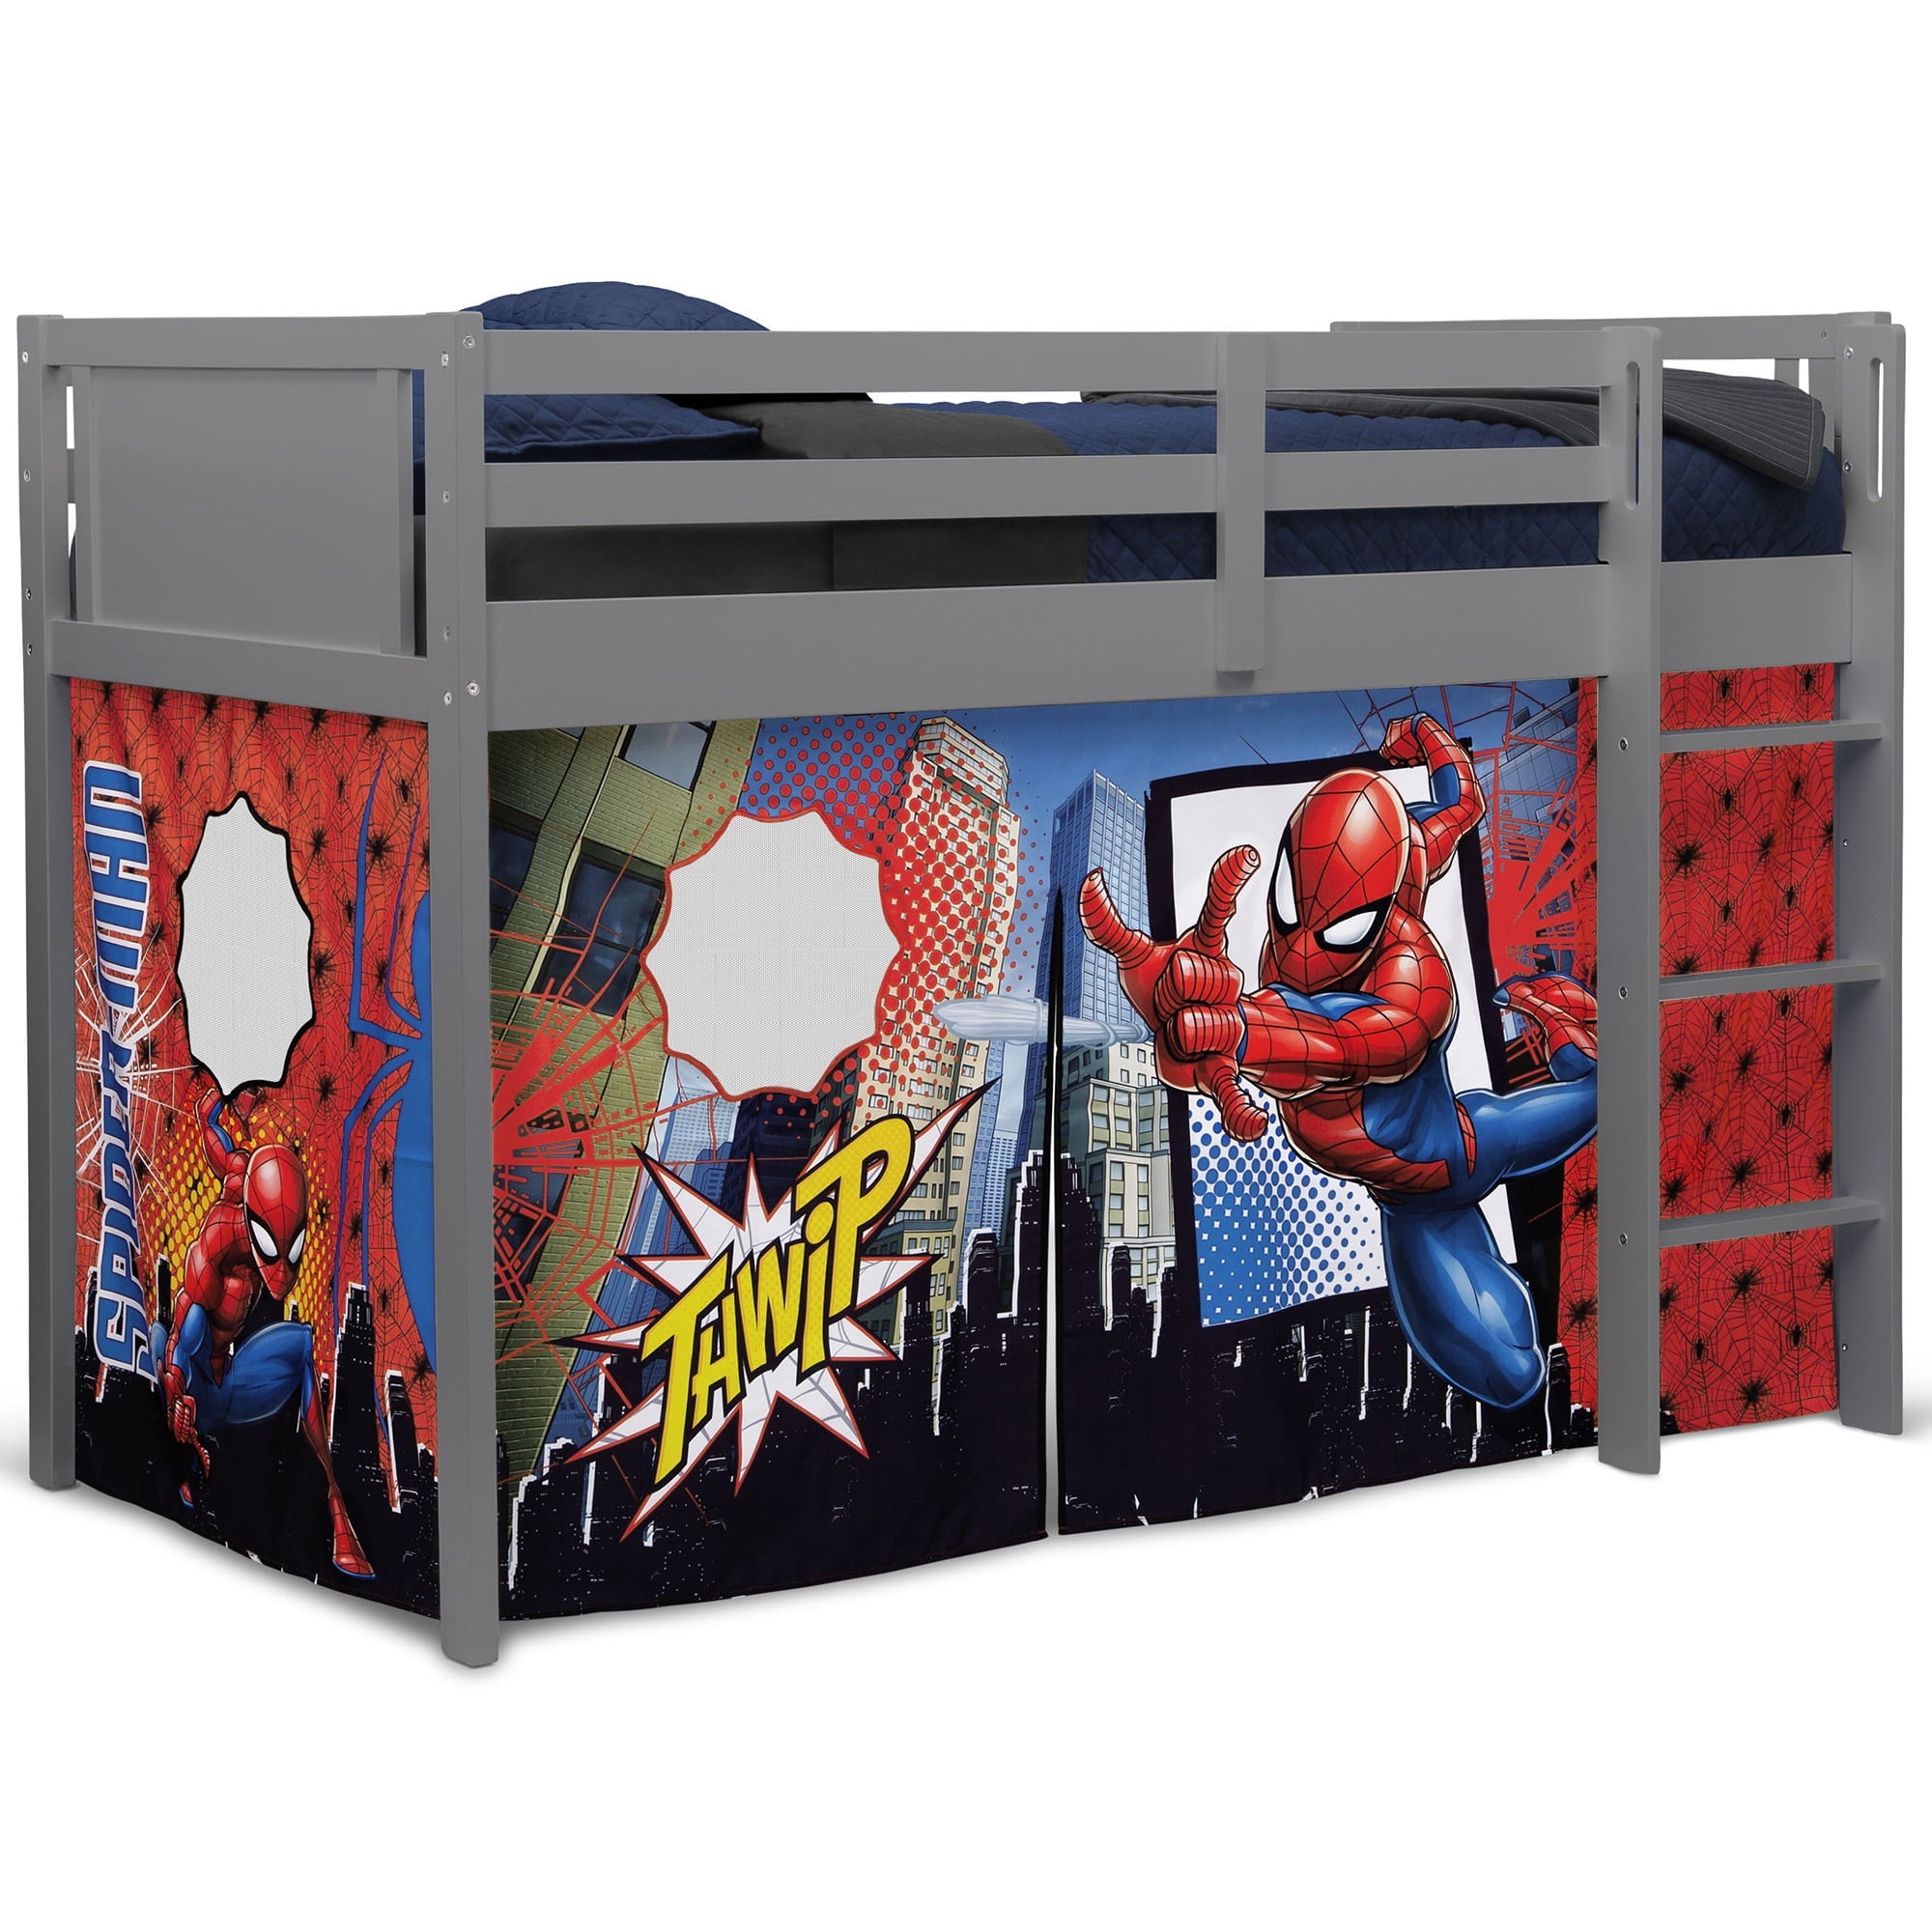 Spider-Man Loft Bed Tent by Delta Children - Curtain Set for Low Twin Loft Bed (Bed Sold Separately)